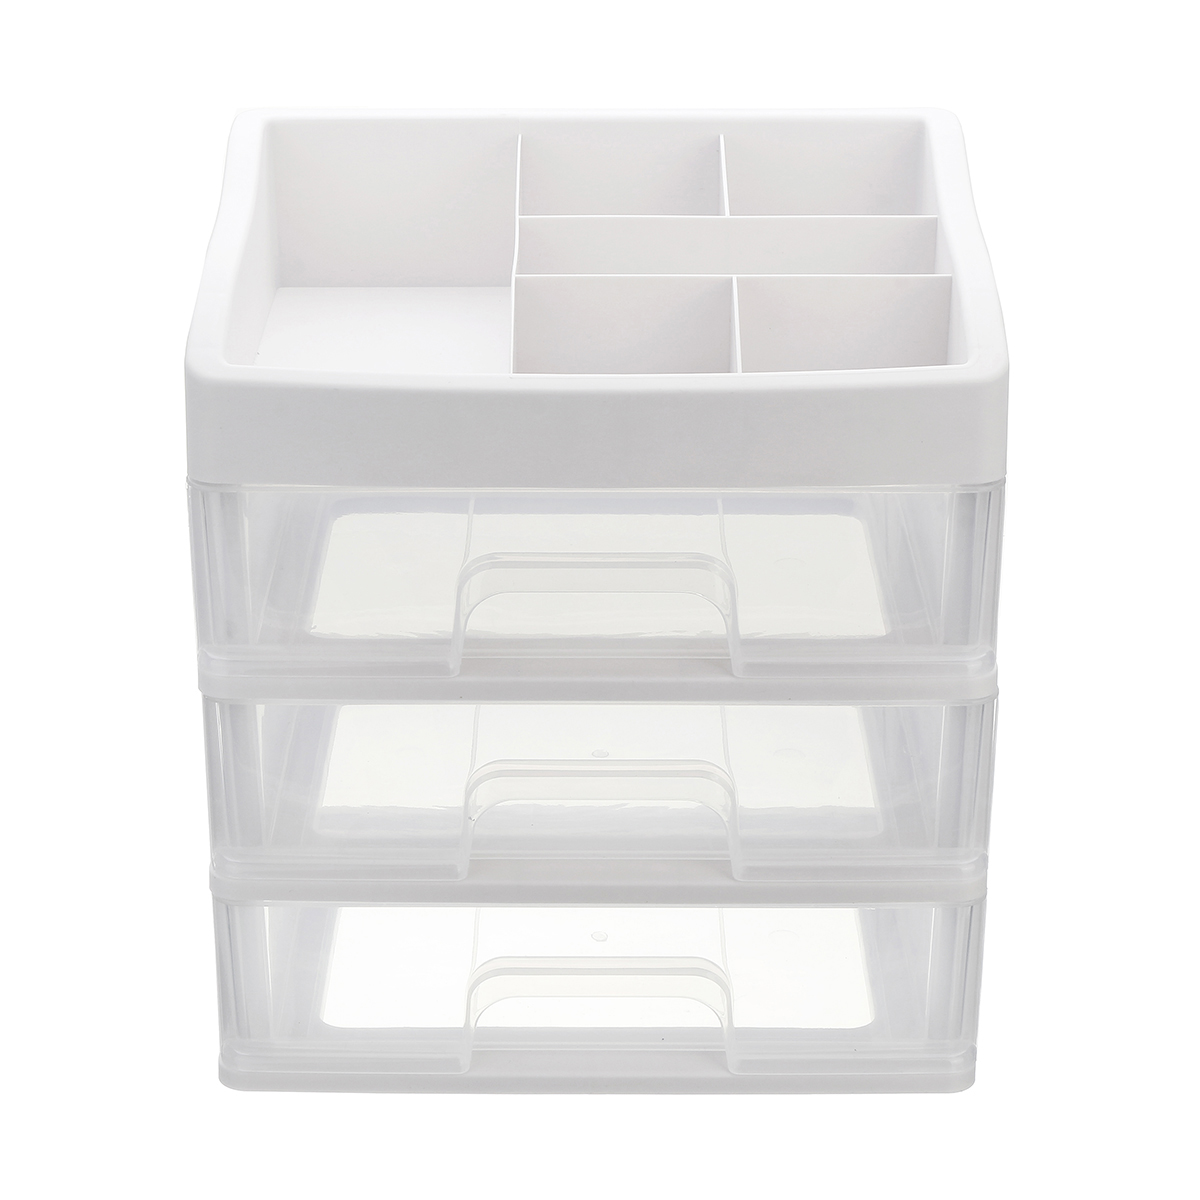 Plastic-Makeup-Holder-Box-Storage-Desktop-Container-Cosmetic--Jewelry-Container-Table-Organizer-1563970-3